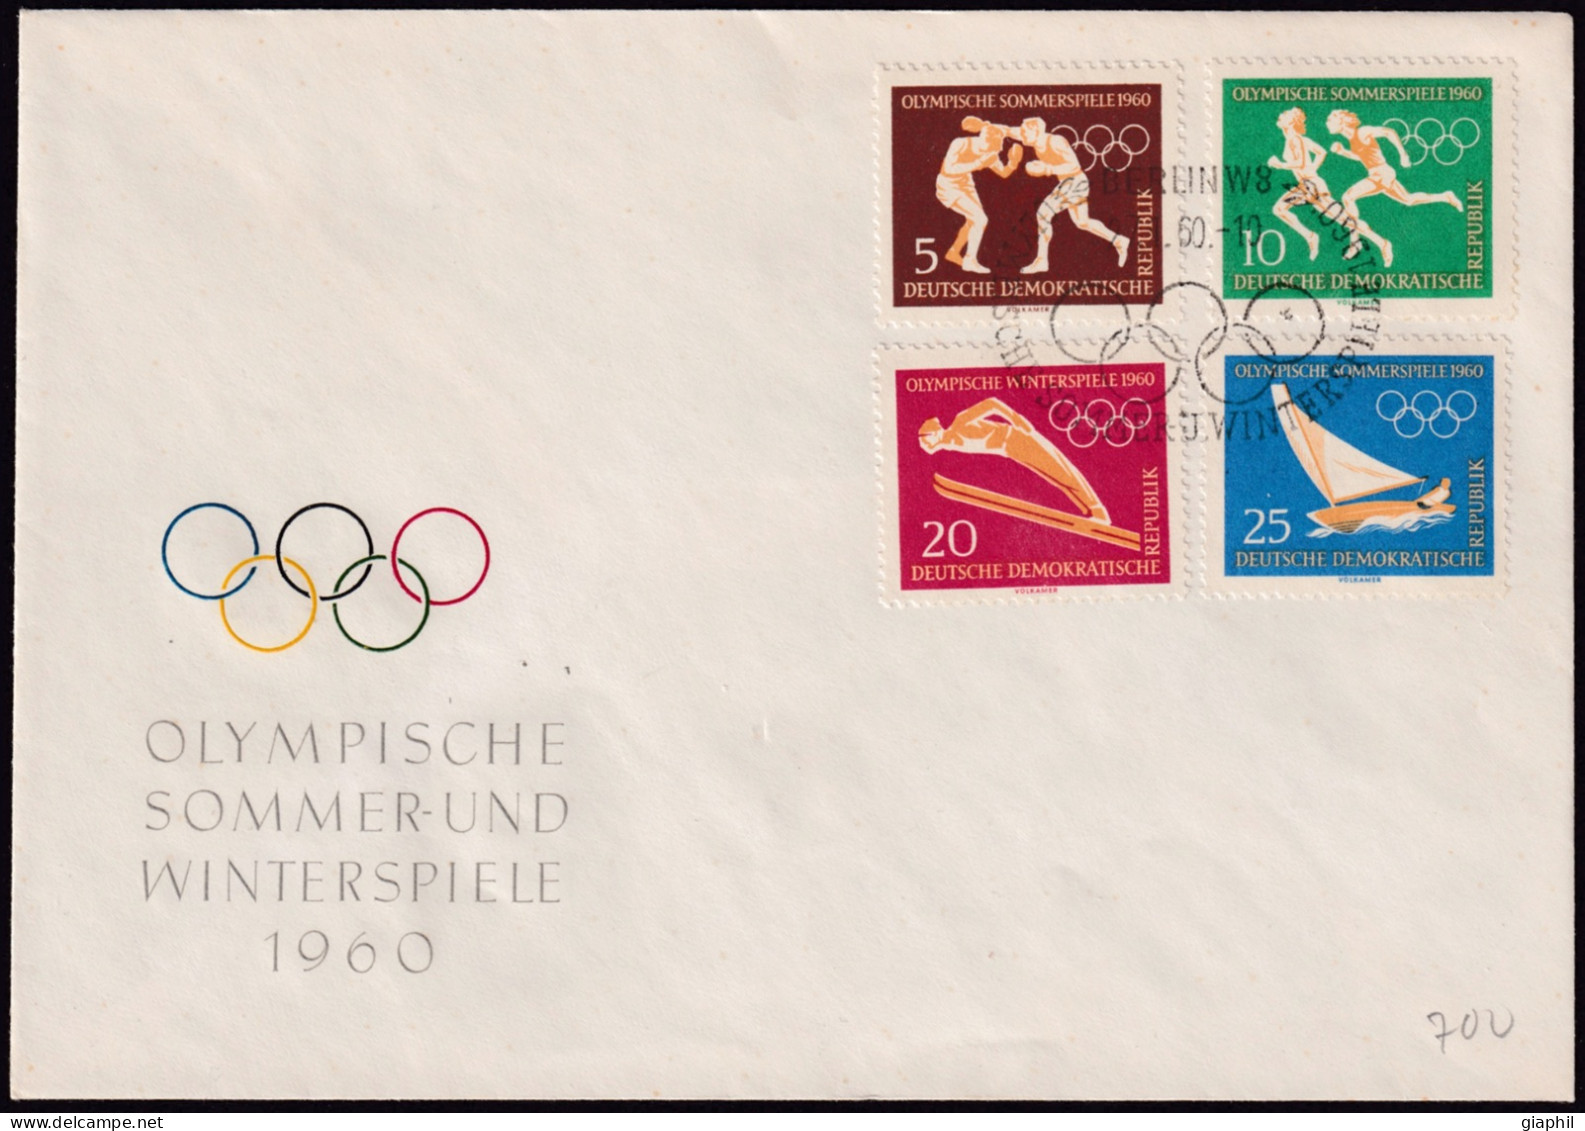 GERMANY EAST - DDR 1960 FDC ROME OLYMPIC GAMES (Mi. 746-749)  OFFER! - Ete 1960: Rome